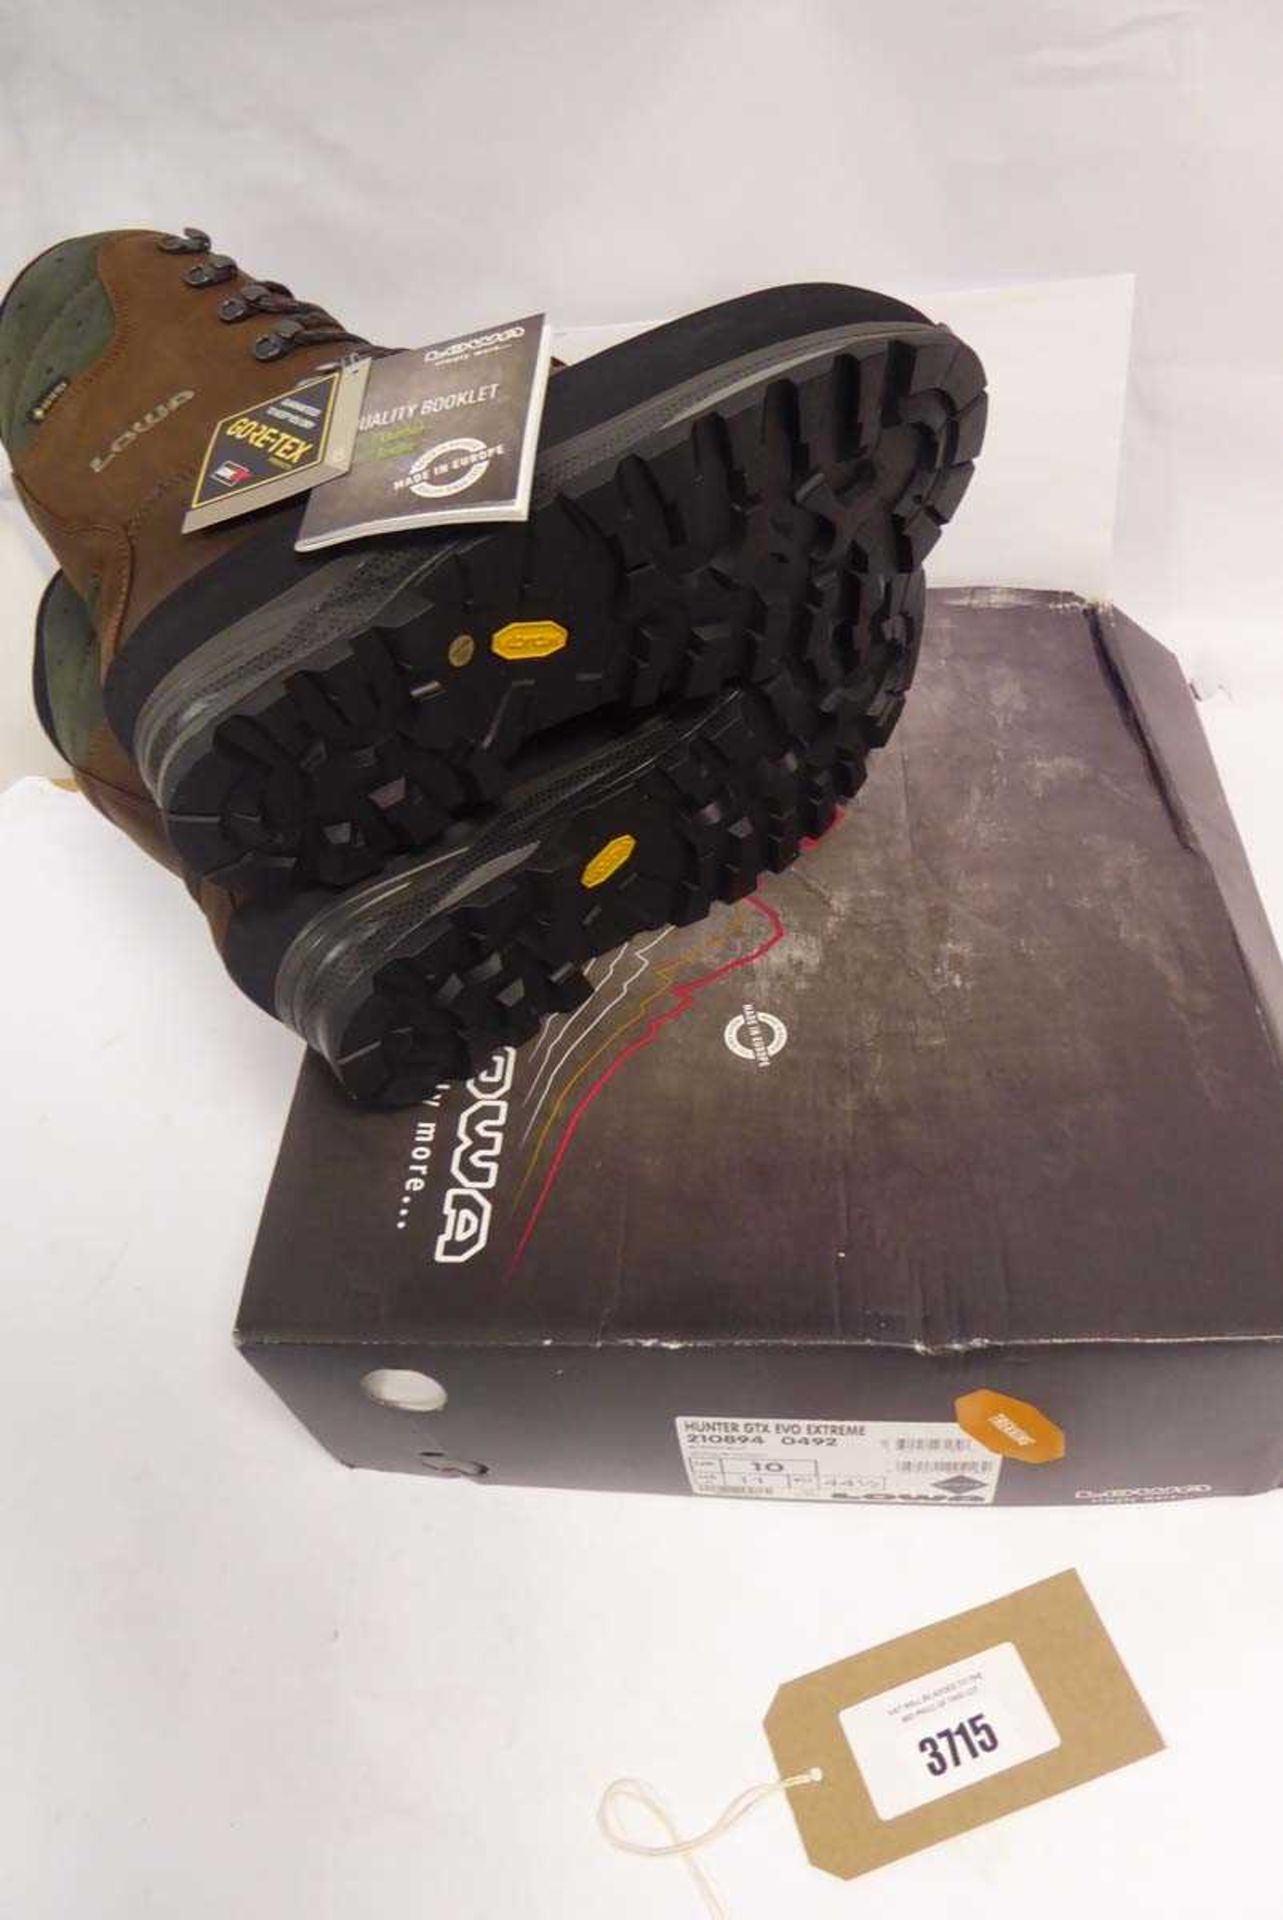 +VAT Boxed pair of Lowa Hunter GTX Evo Extreme boots in antique brown, size UK 10 (some damage to - Image 3 of 3